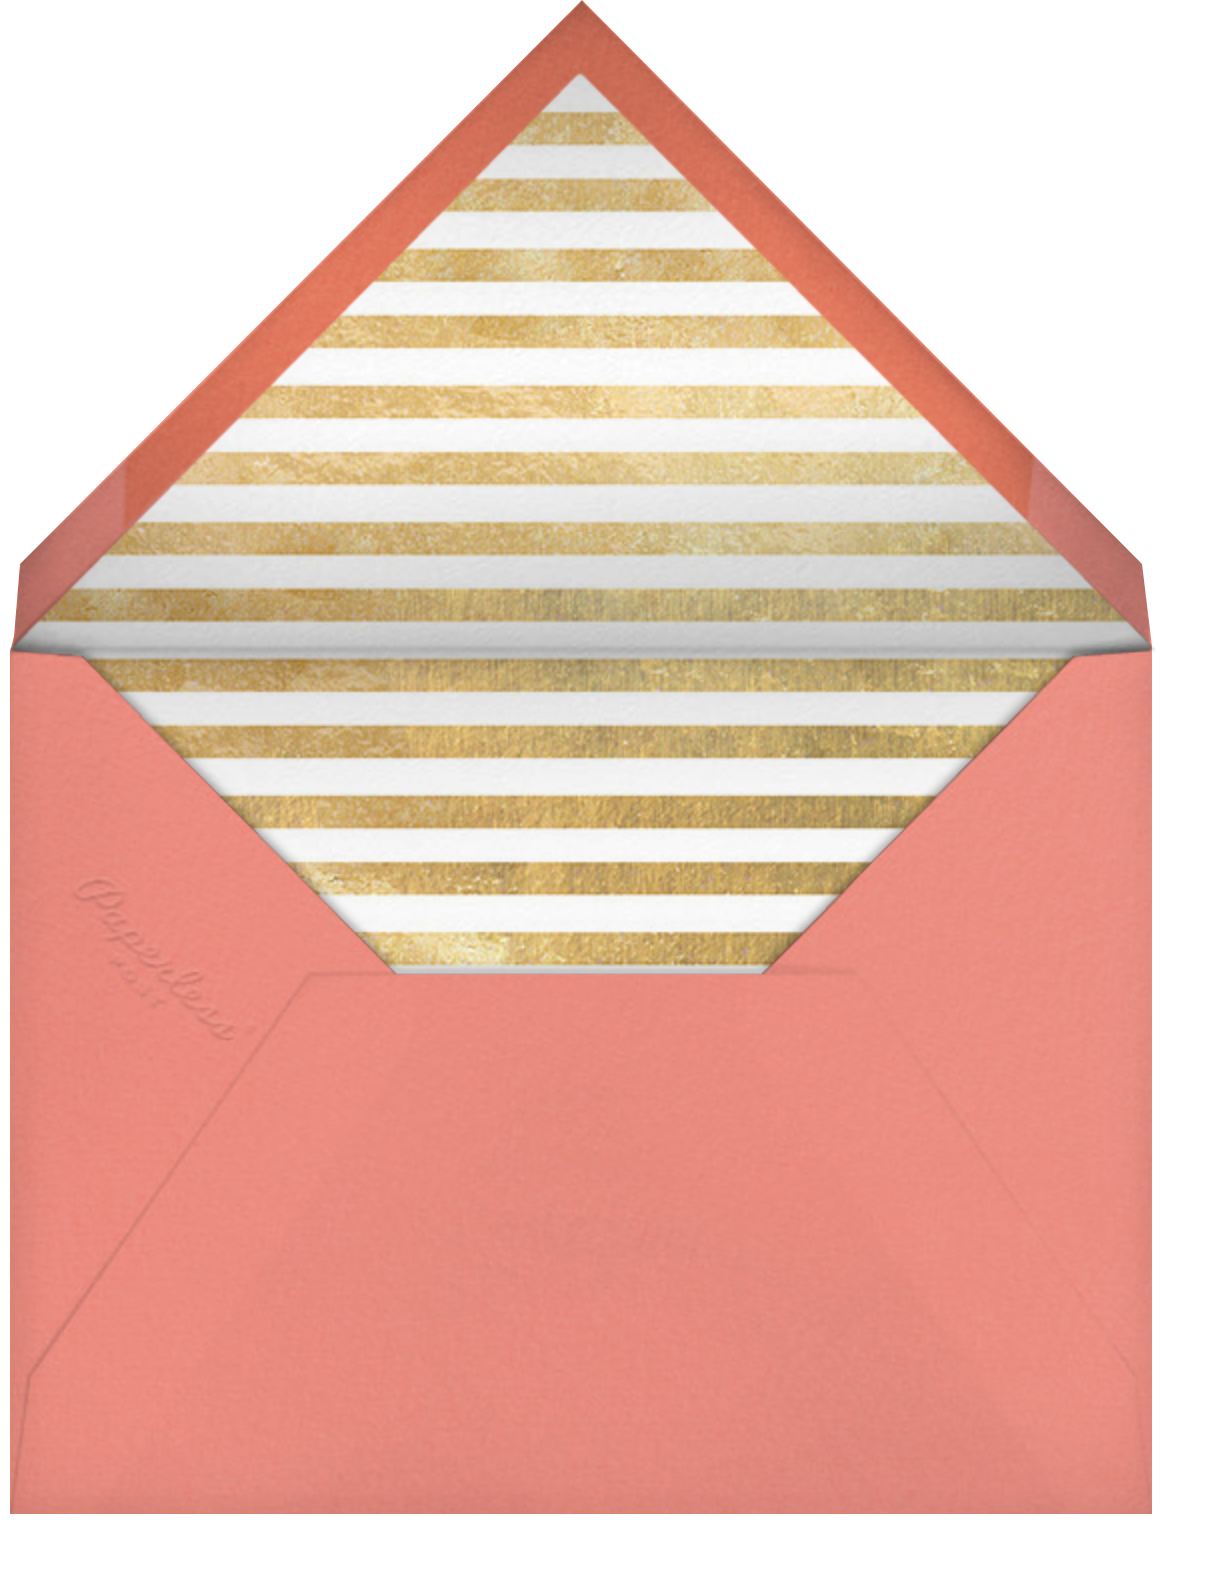 Decade Photo (Thirty) - Gold - Paperless Post - Envelope